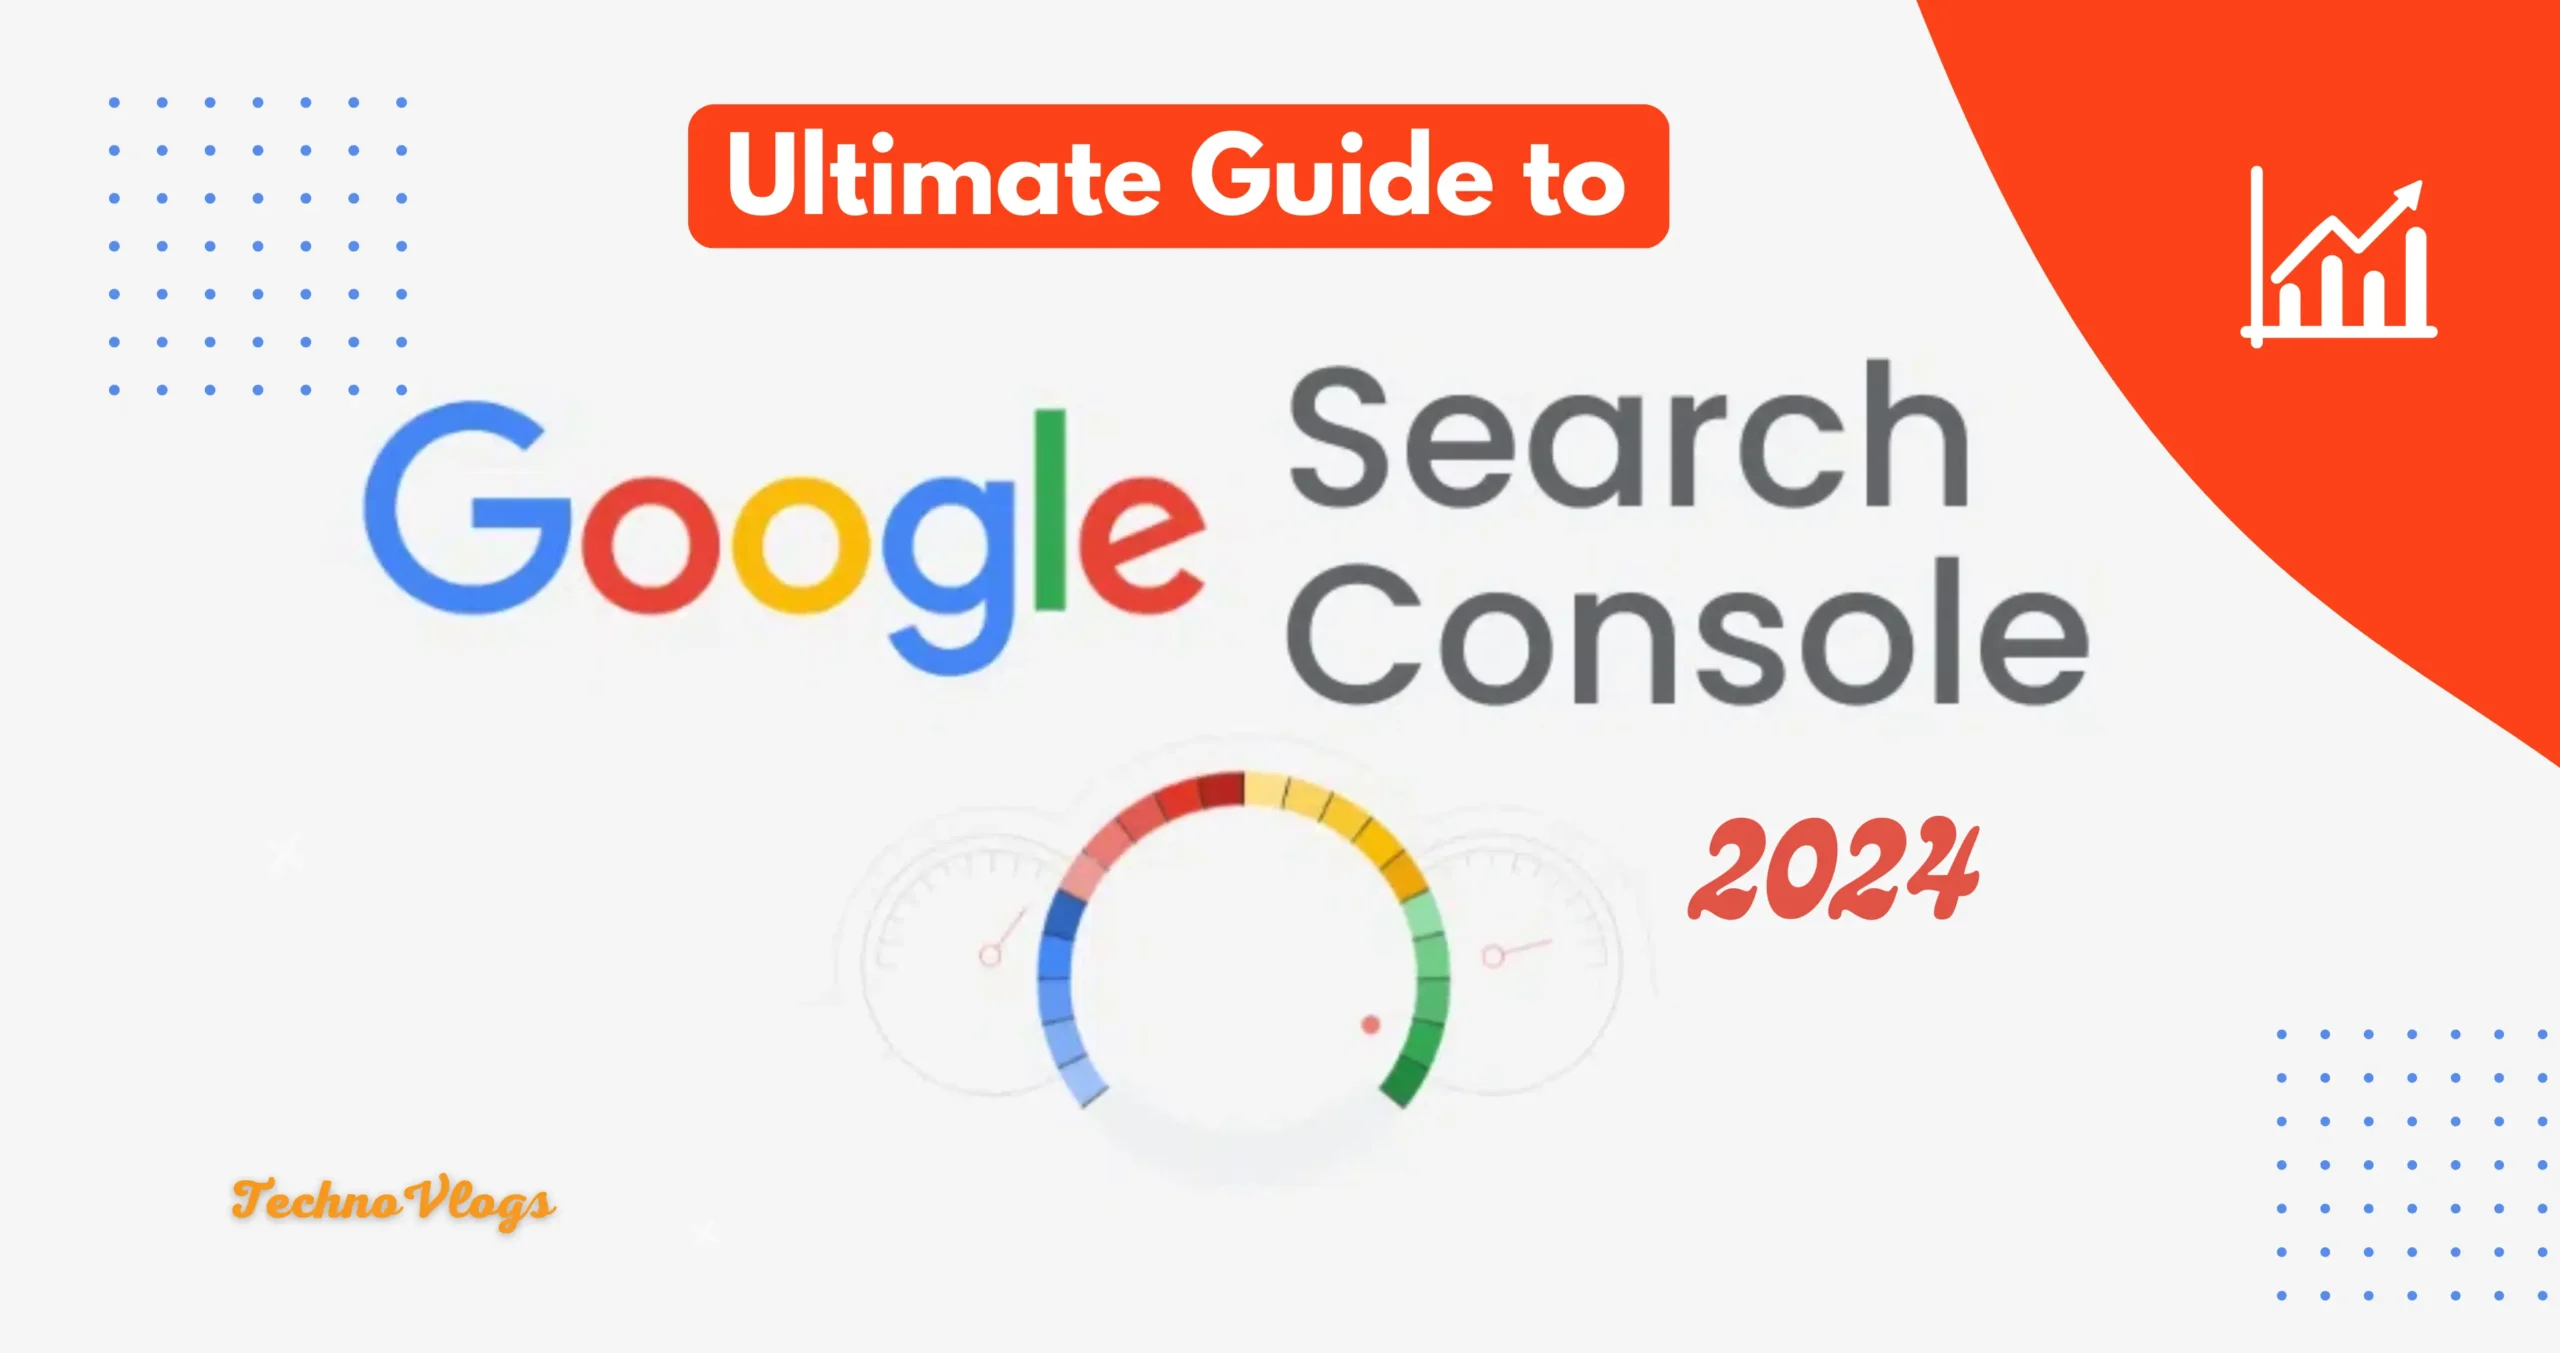 Ultimate Guide to Google Search Console in 2024